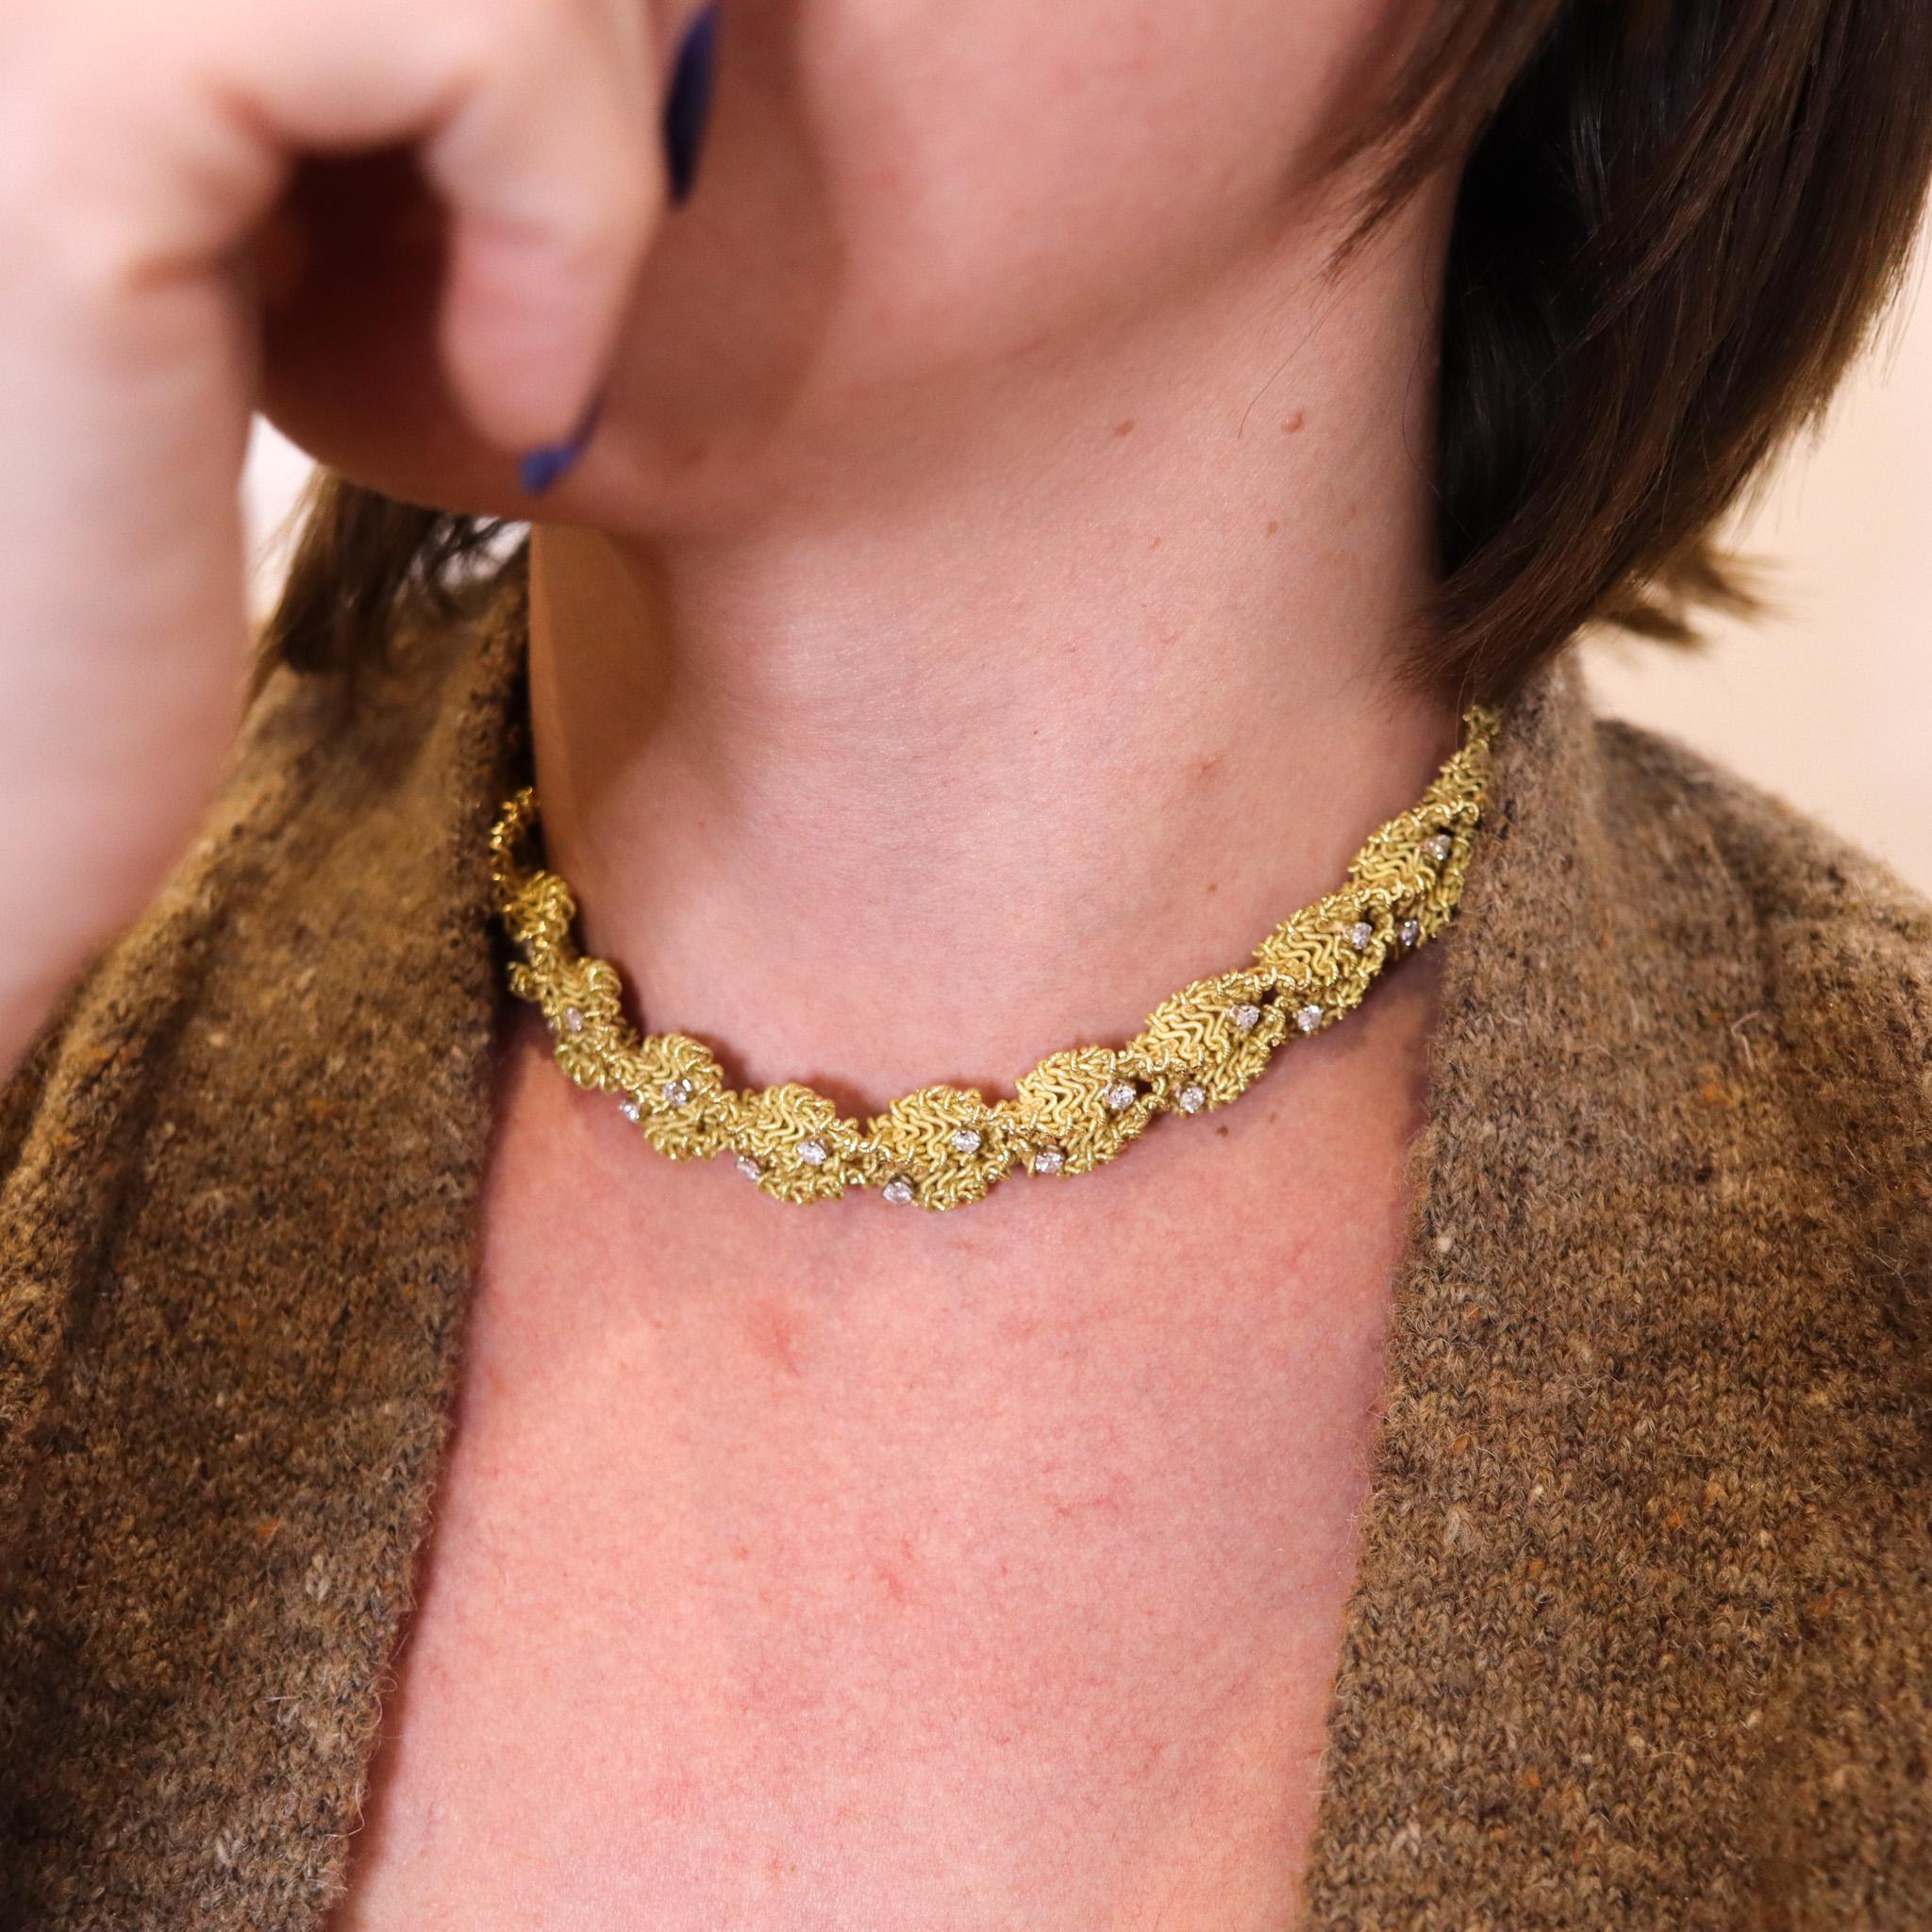 Chantecler 1960 Textured Twisted Necklace In 18Kt Gold With 5.15 Ctw In Diamonds 1